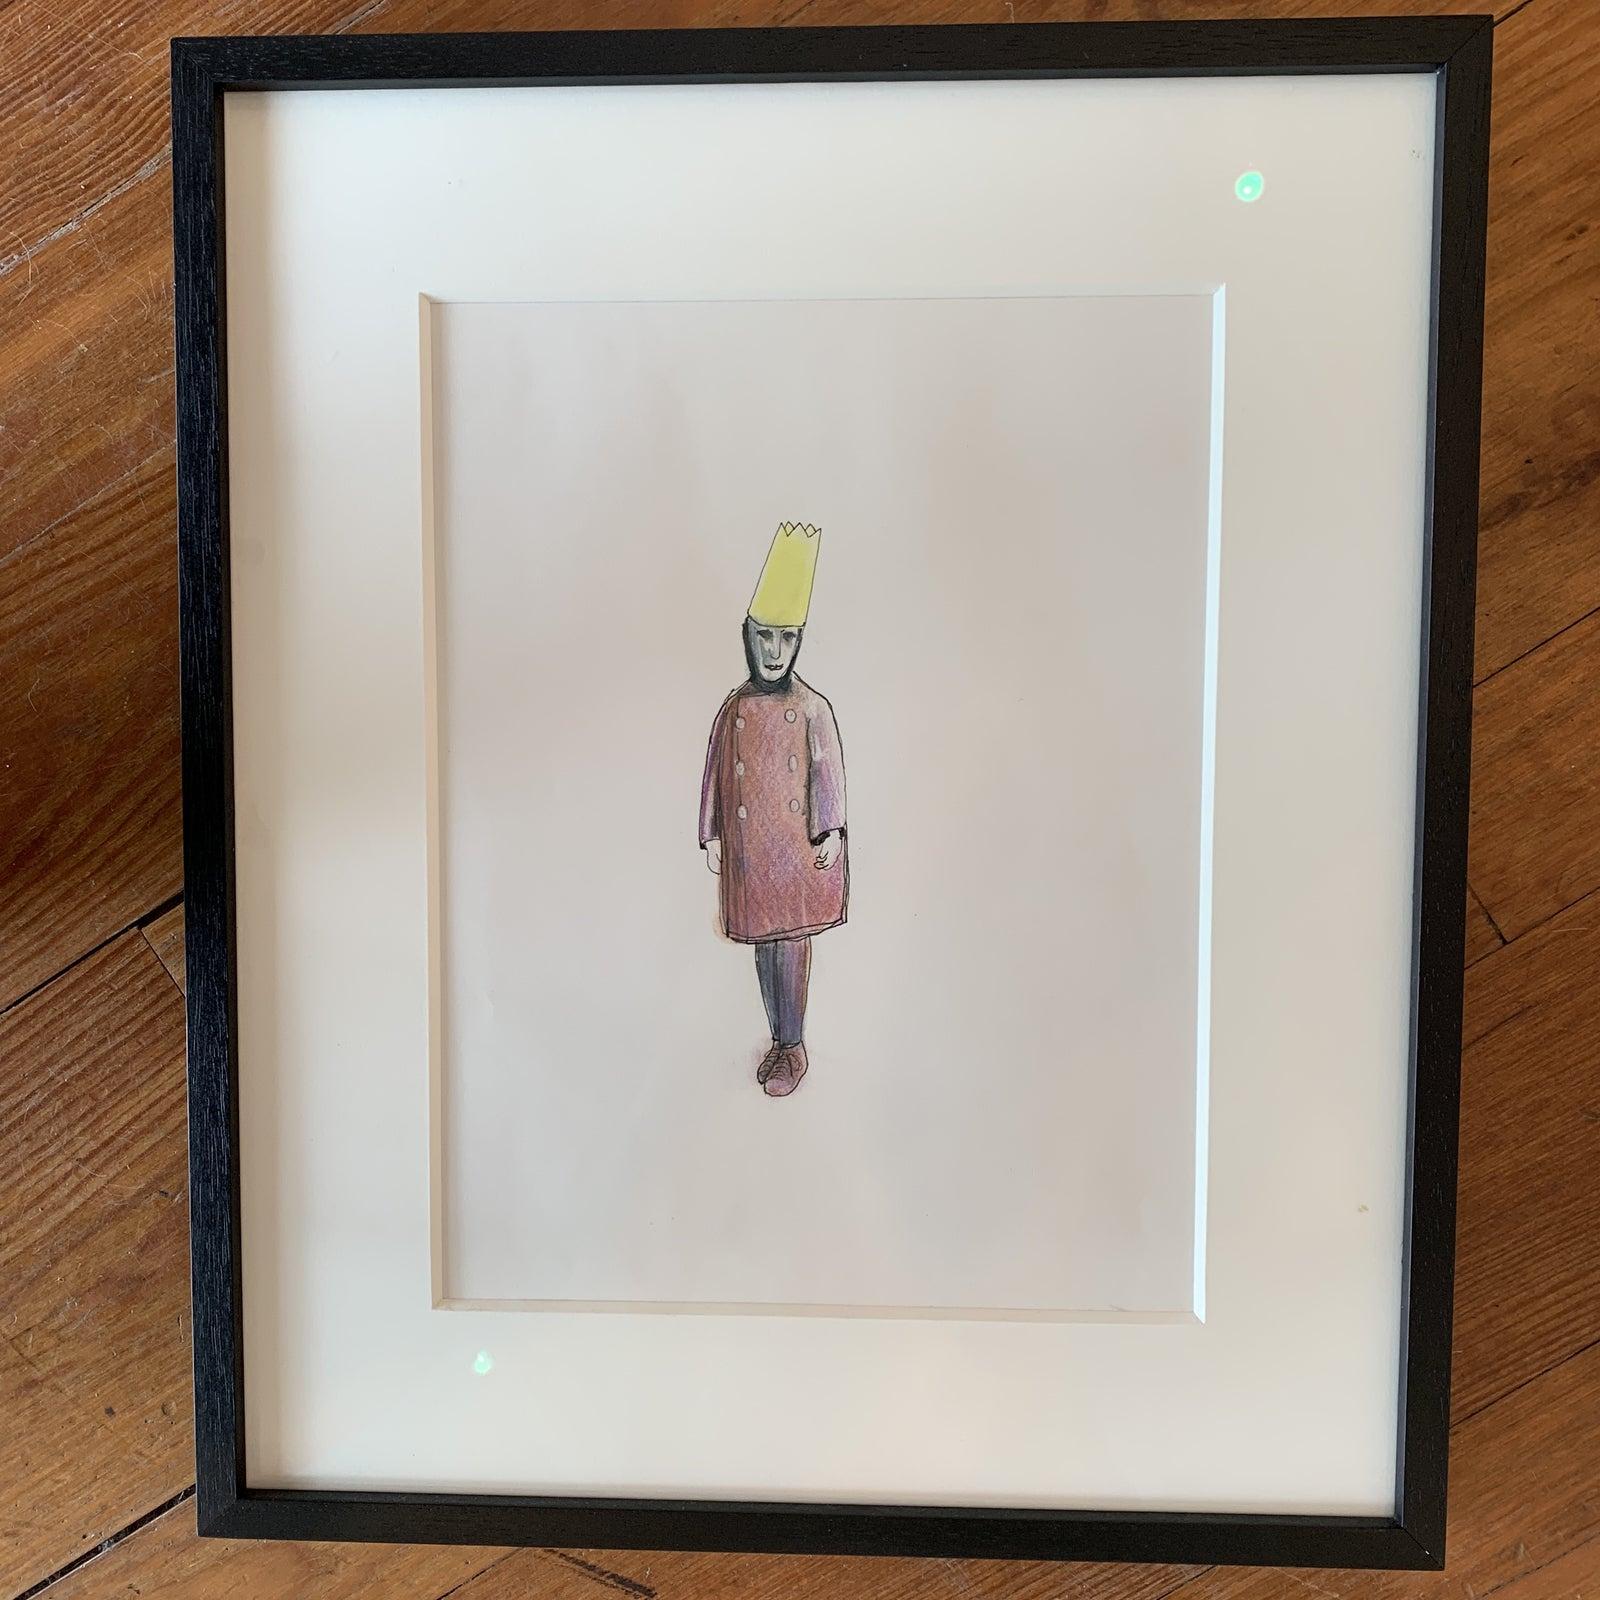 Framed Drawing by Tony Hernandez 

Tony Hernandez began painting and drawing when he was seven years old. Although encouraged to pursue his talent by art teachers, Hernandez decided to study architecture, a more acceptable career path according to